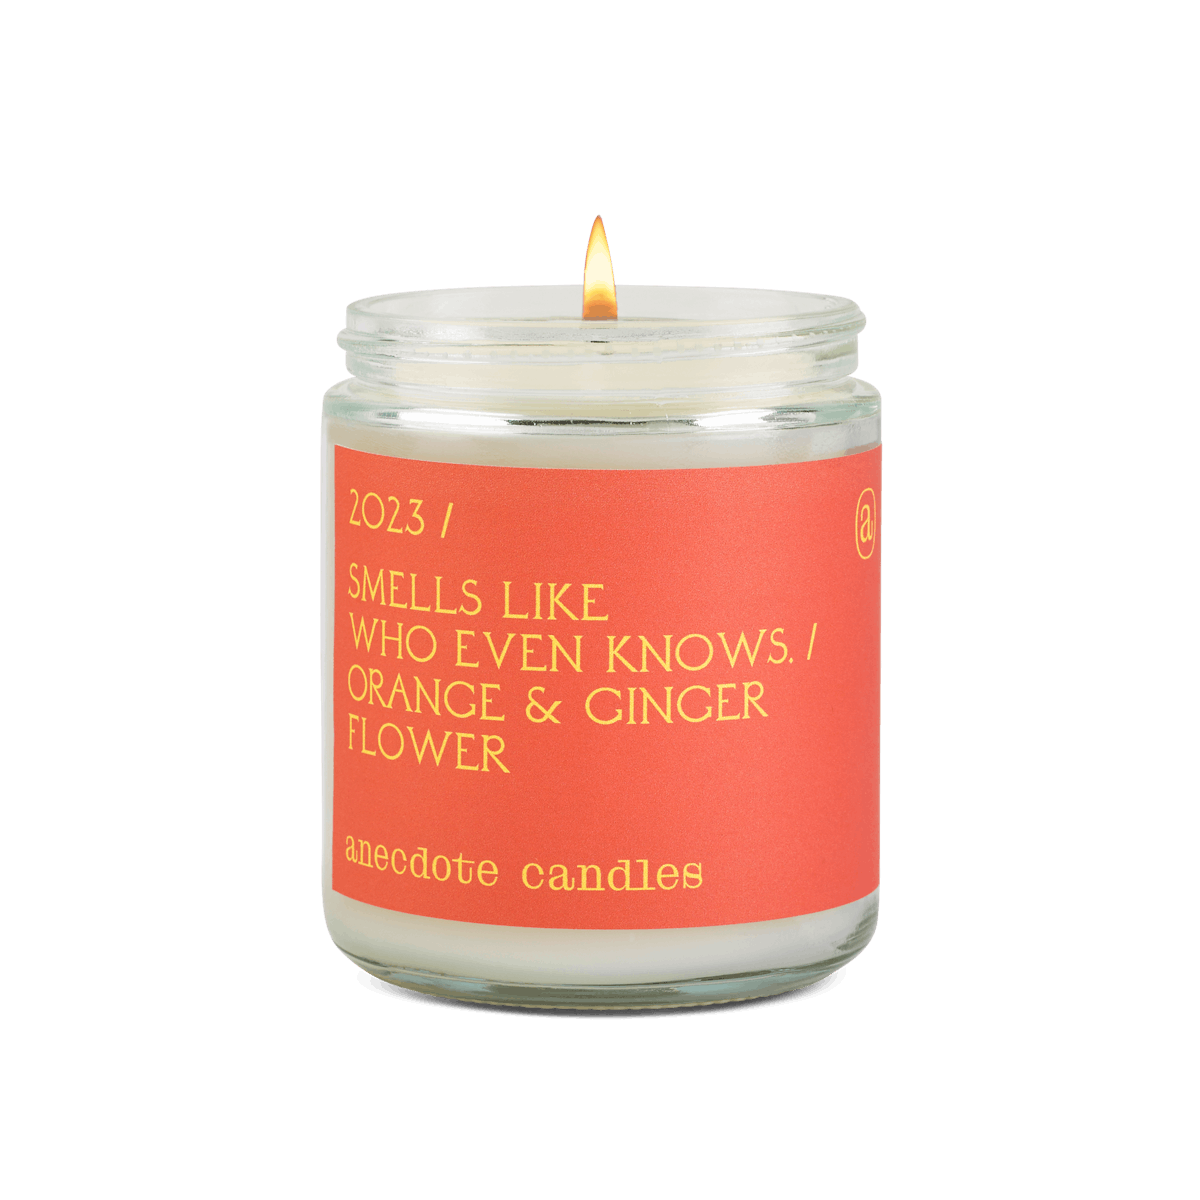 Drake is releasing an $80 candle that smells, well, just like Drake